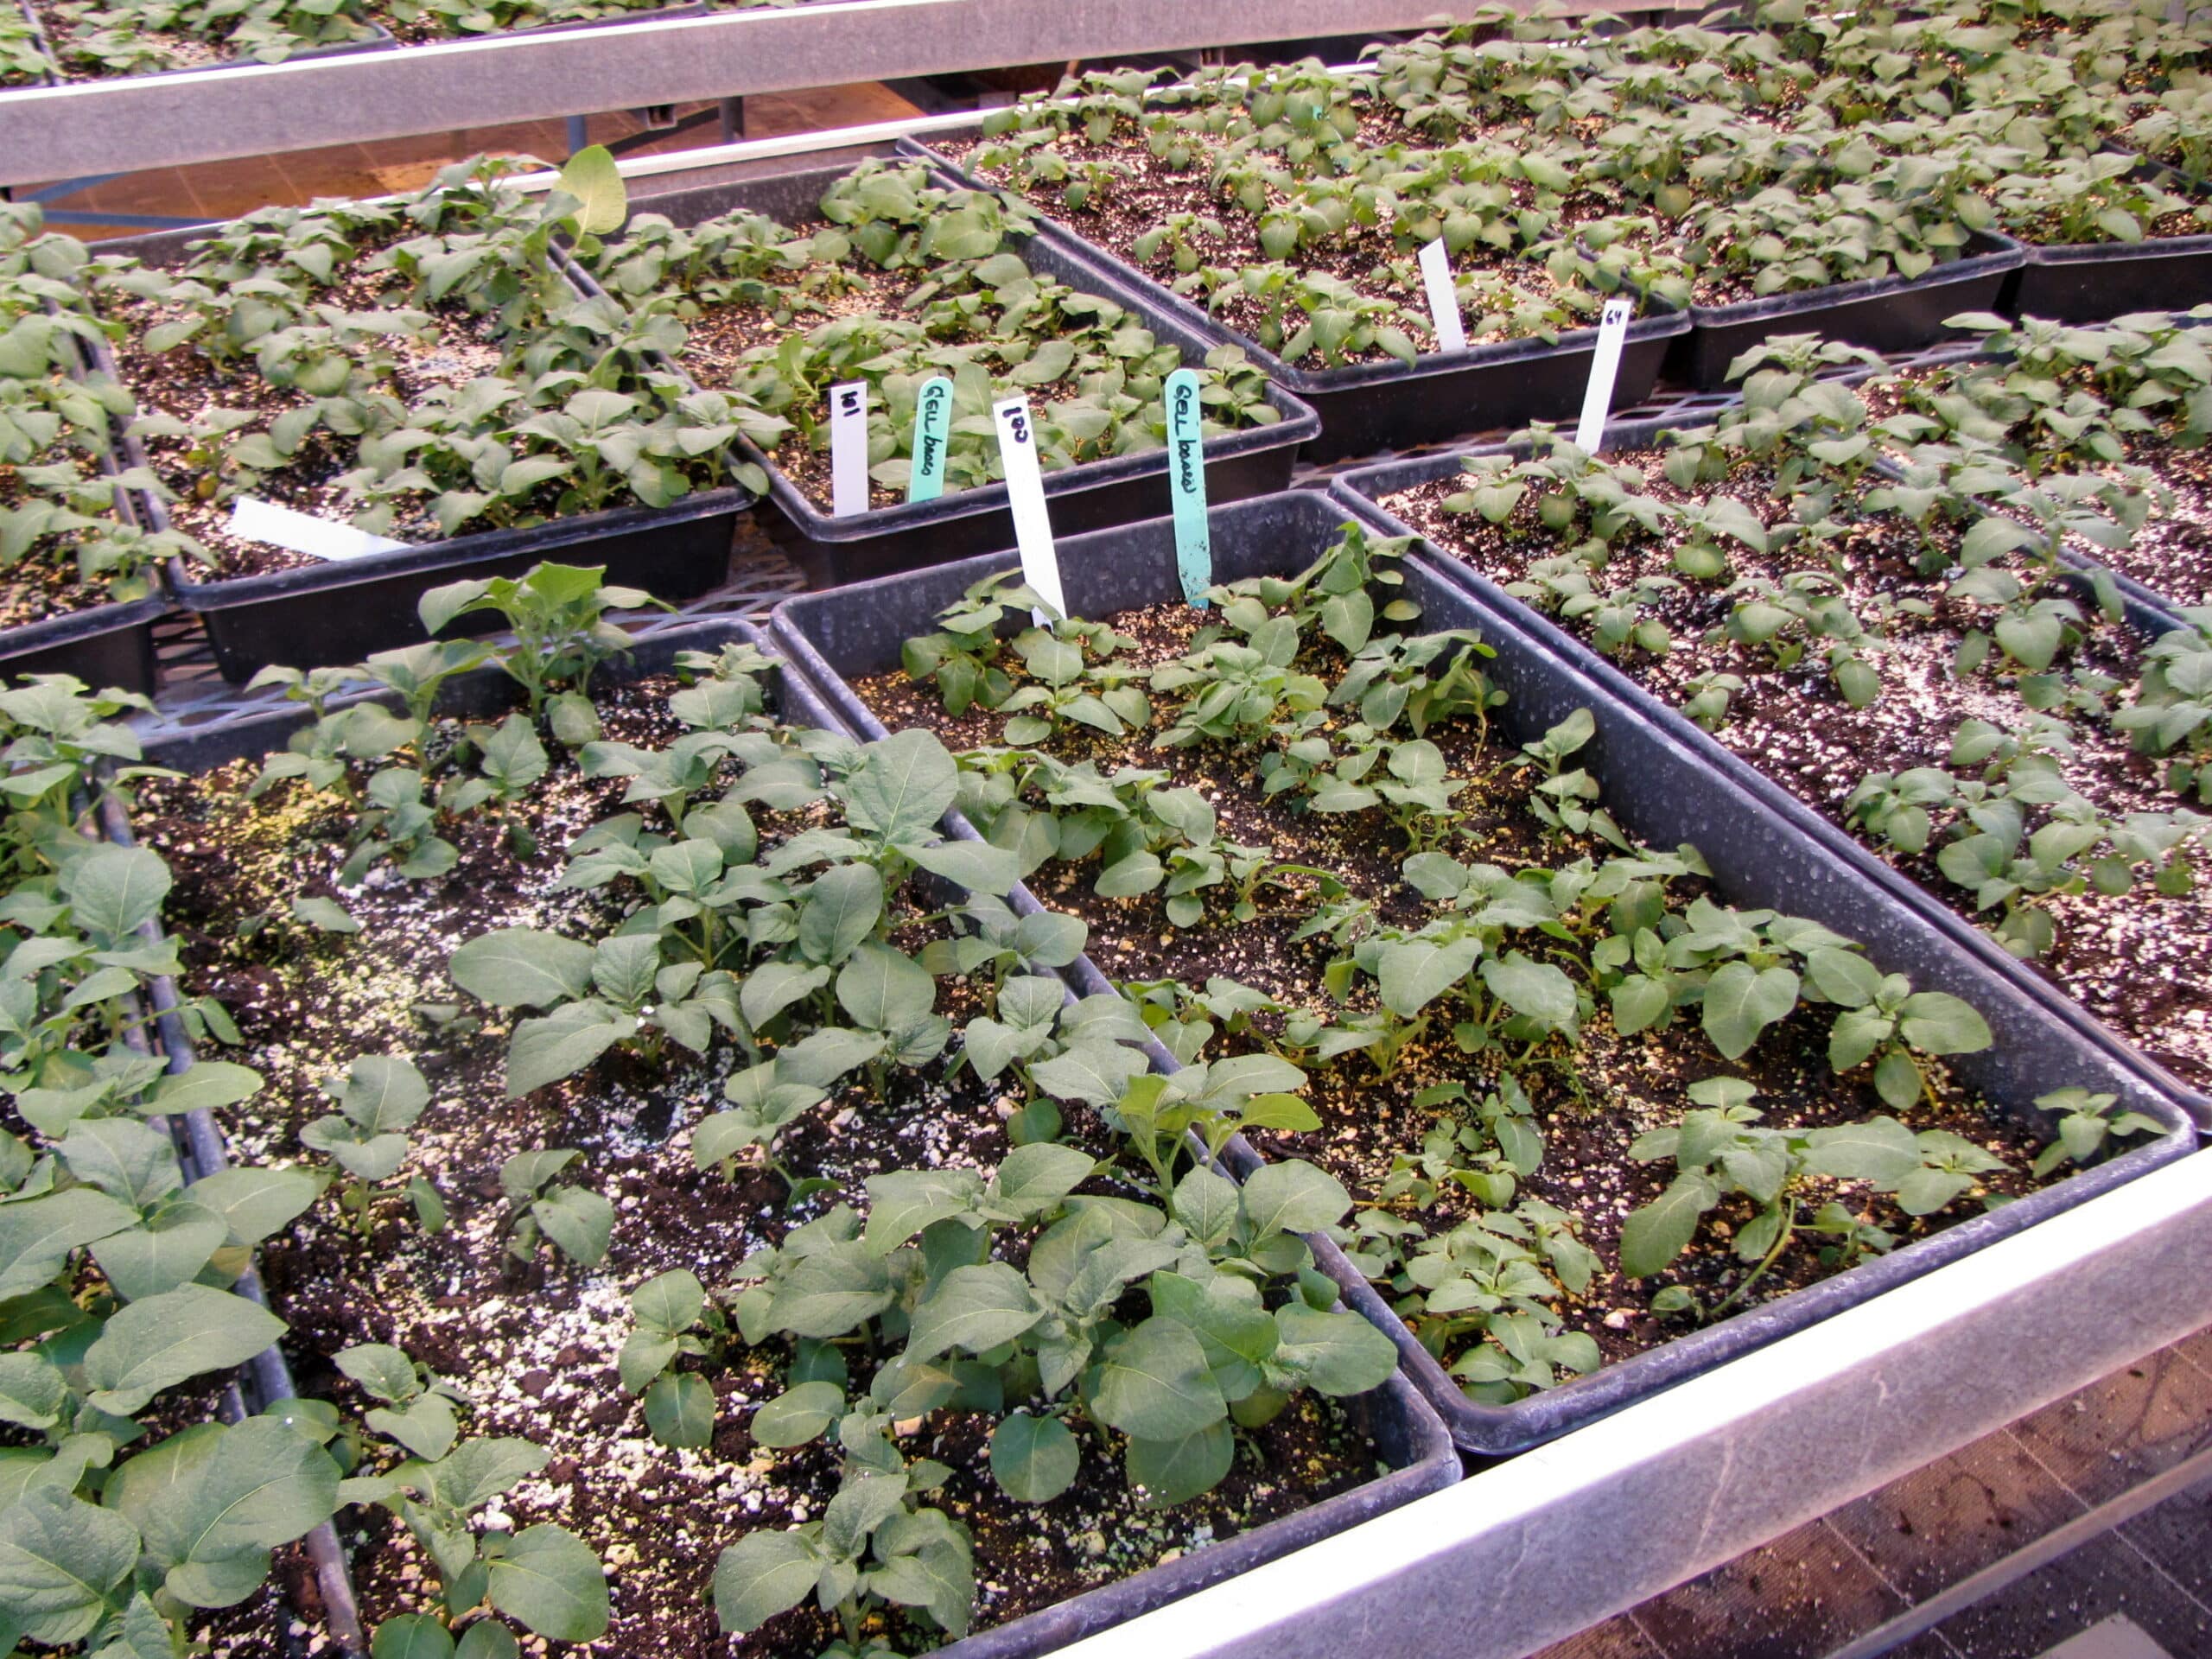 Minituber production in a greenhouse